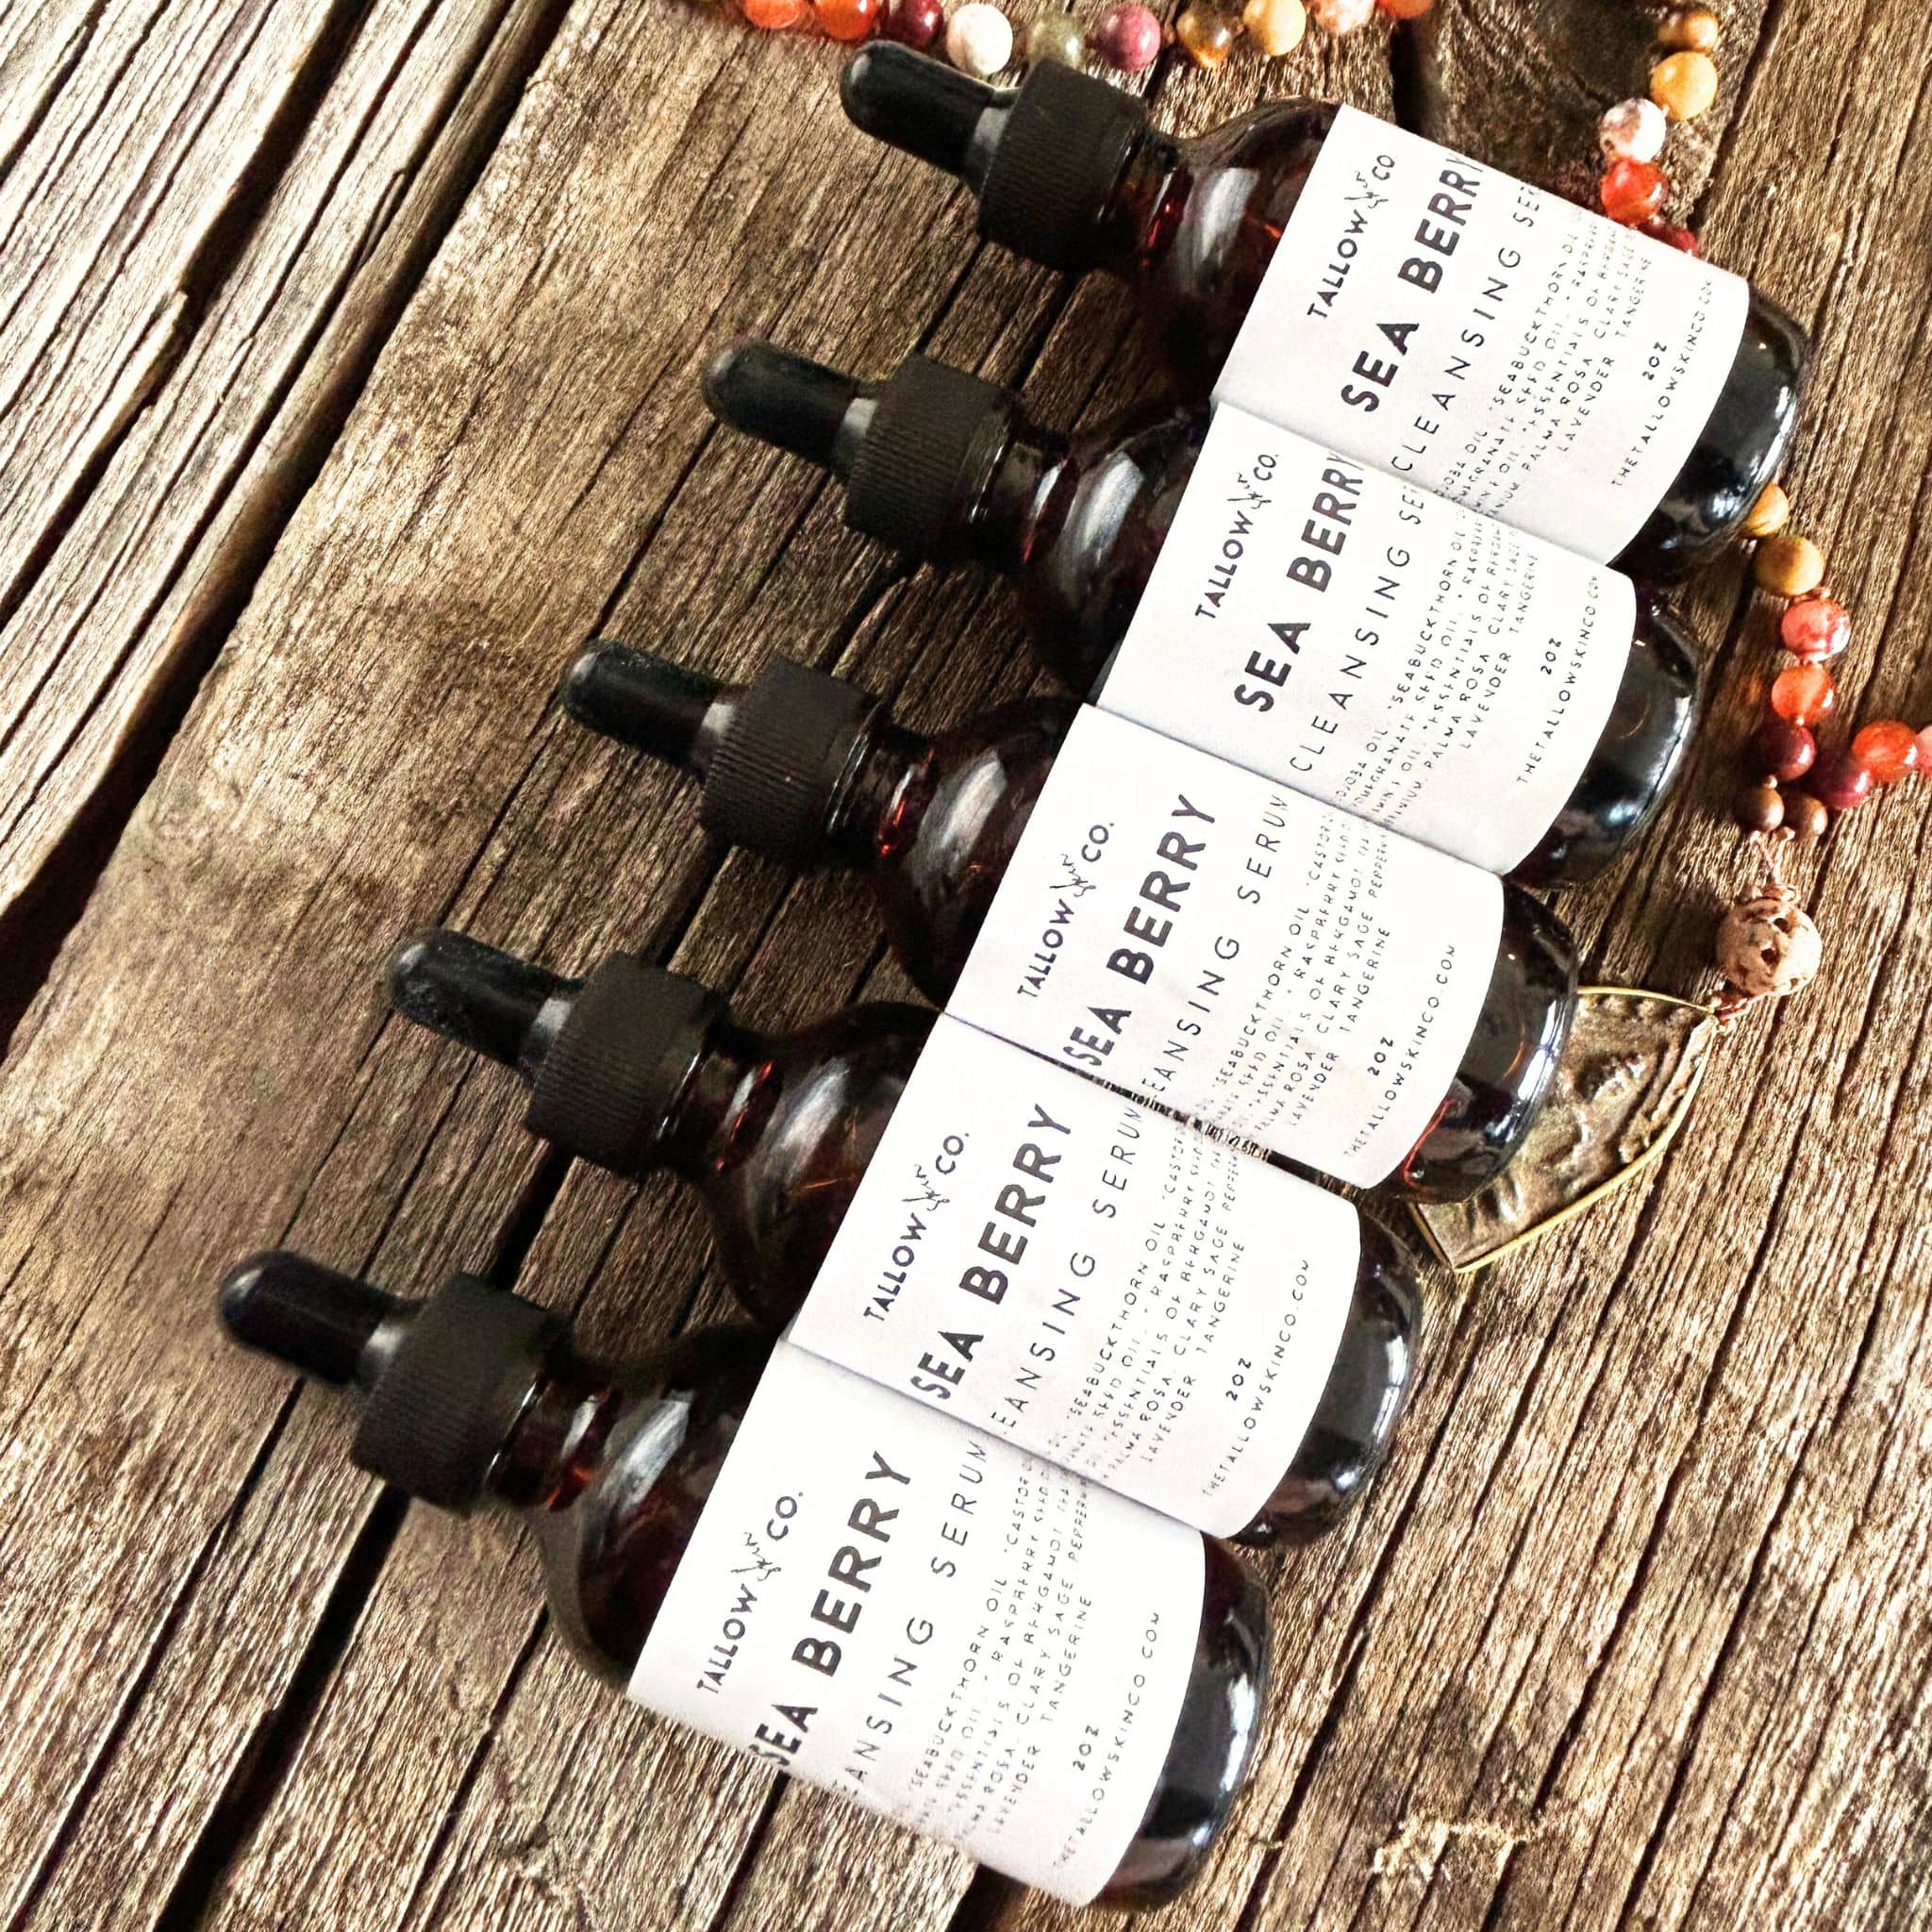 Bottles of sea buckthorn oil cleanser laying on barnwood with a mandala.